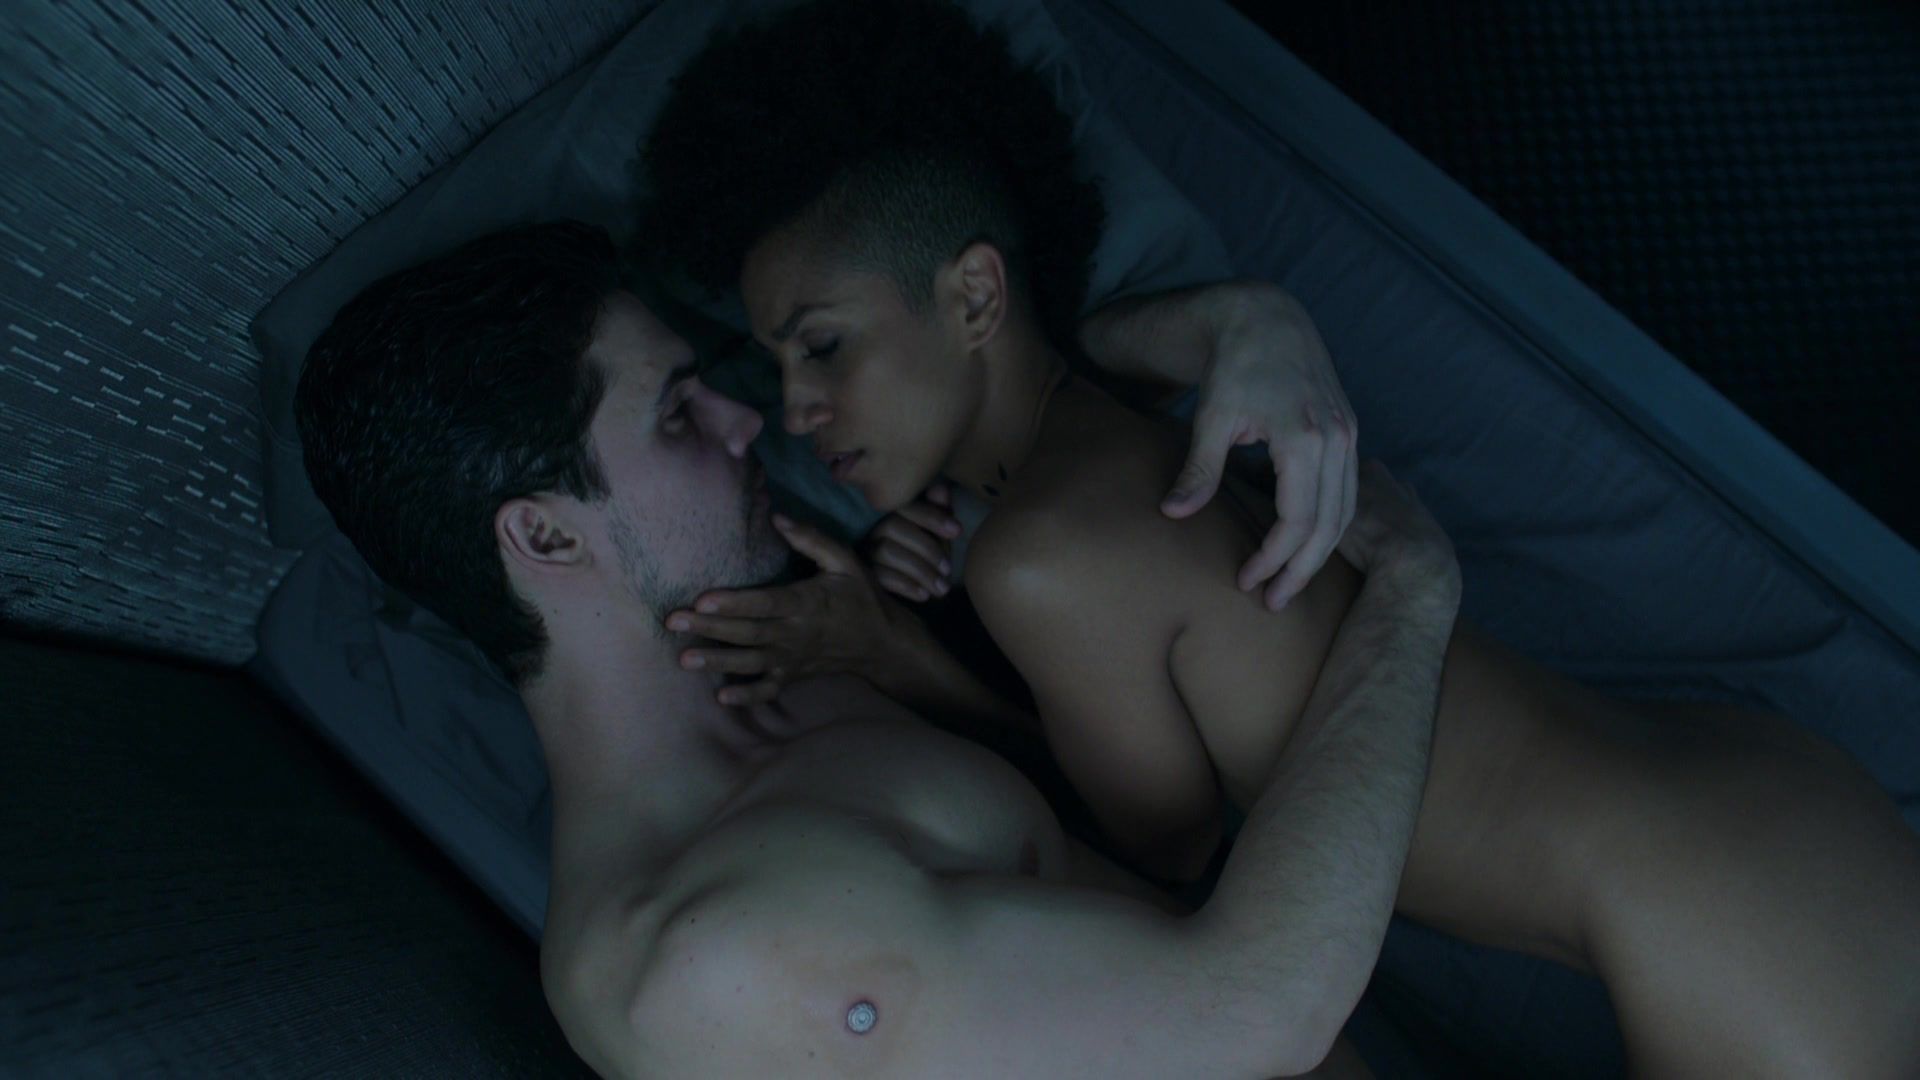 Anal Porn Dominique Tipper nude - The Expanse s03e06 (2018) AdultSexGames